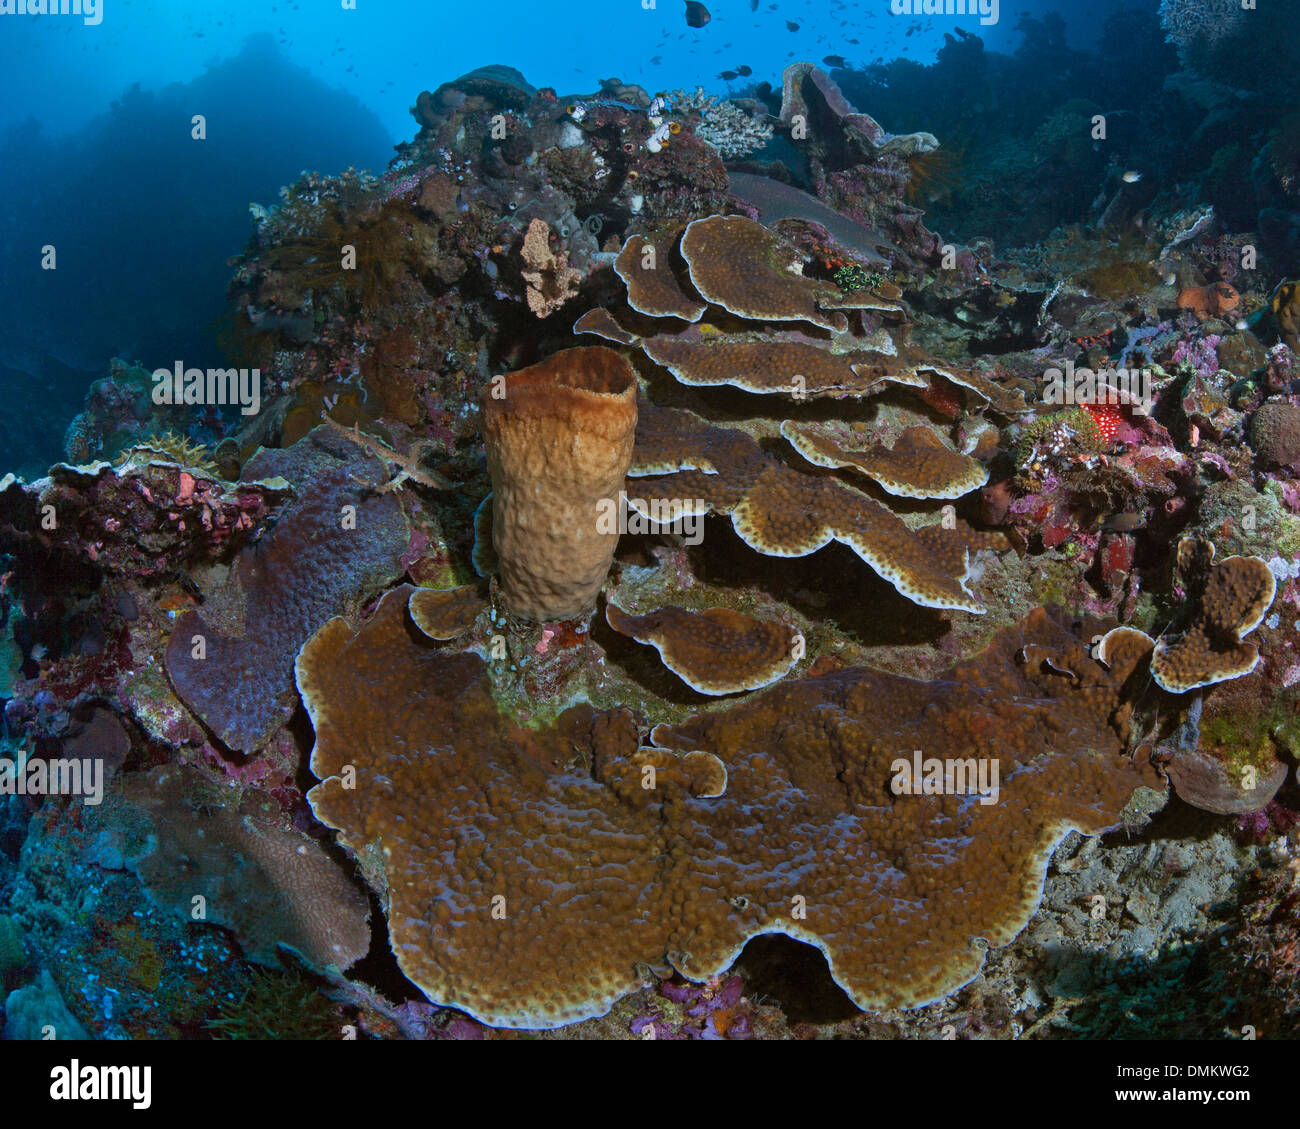 Plate coral colony on ledge of wall reef of Bunaken Island, Indonesia. Stock Photo